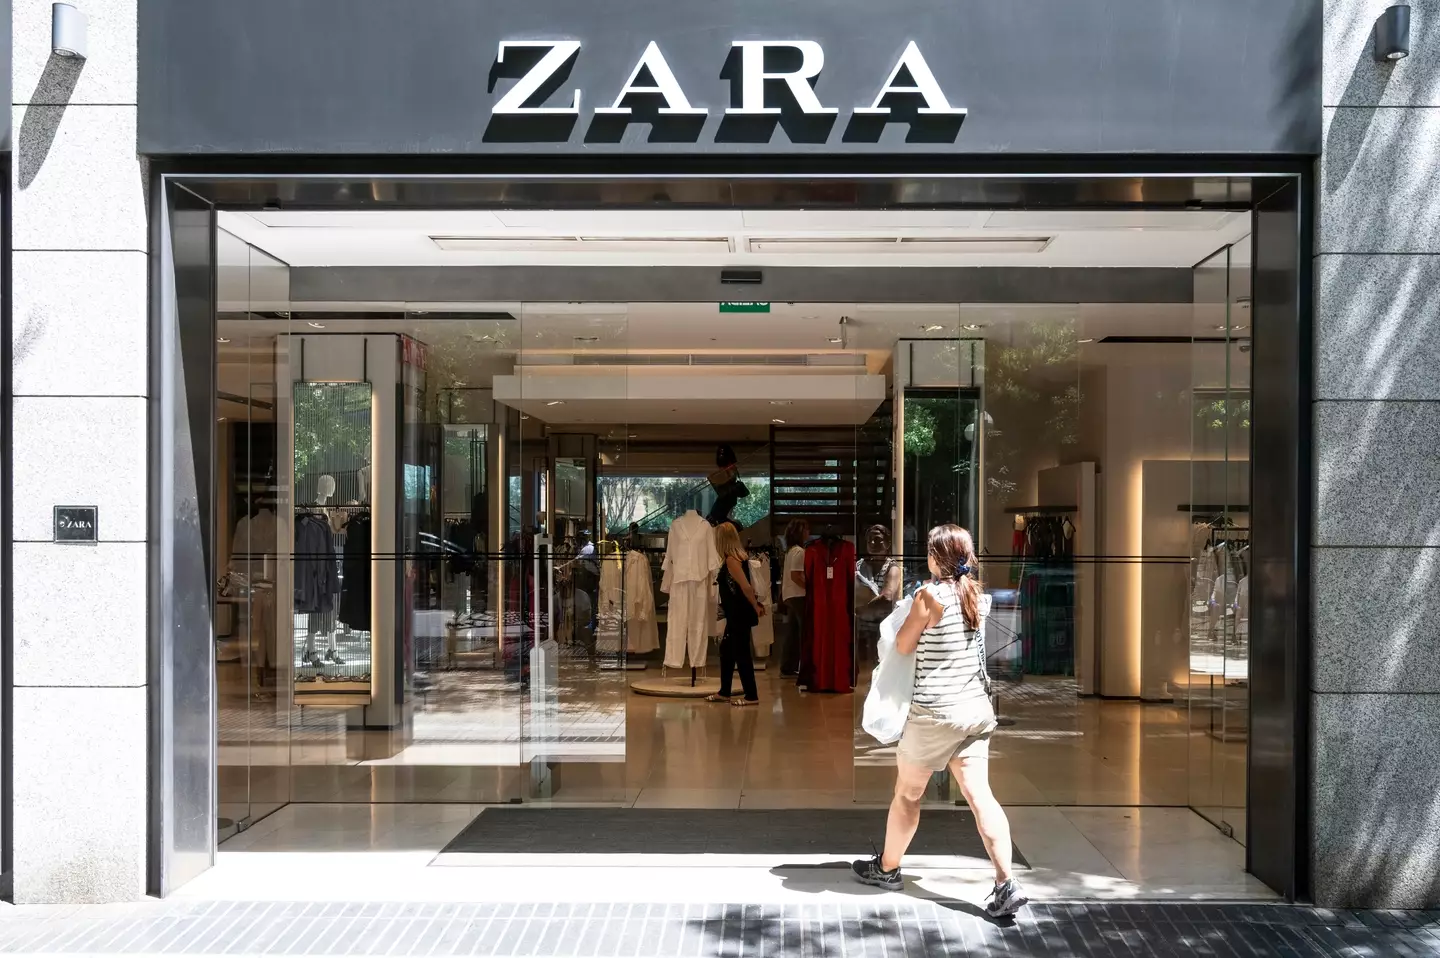 Zara was one of the stores accused of selling primarily polyester clothes.